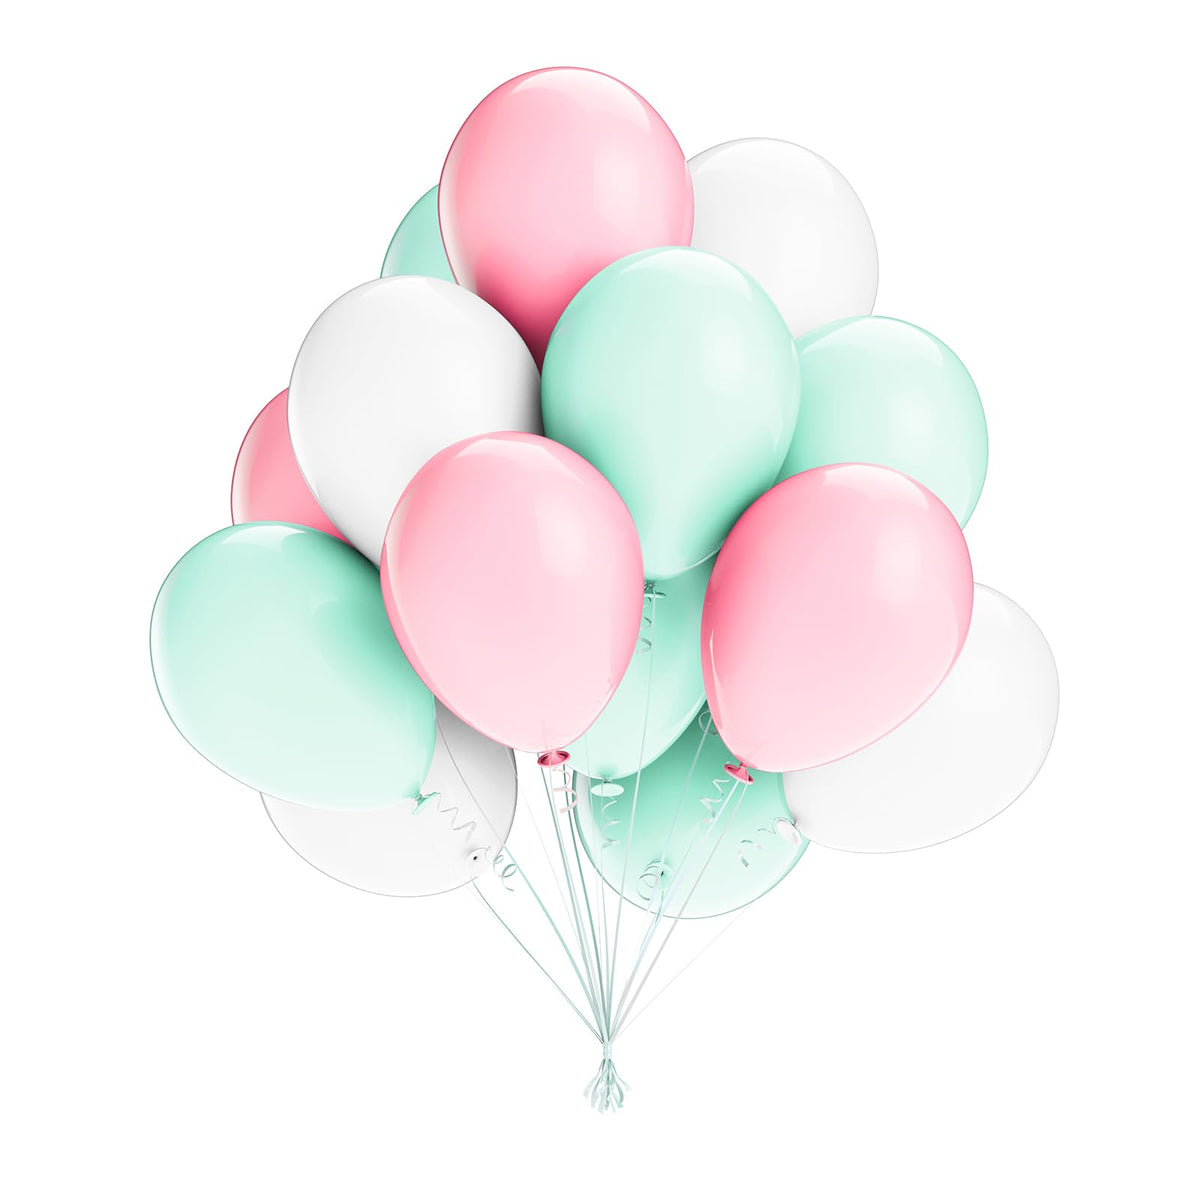 SimpleWild Premium 10-Inch Pastel Pink, Mint Green & White Balloons Mix - Large & Durable, Helium-Quality Latex Baloon for Birthday Decoration, Balloon Arch Kit and Celebrations - Pack of 50